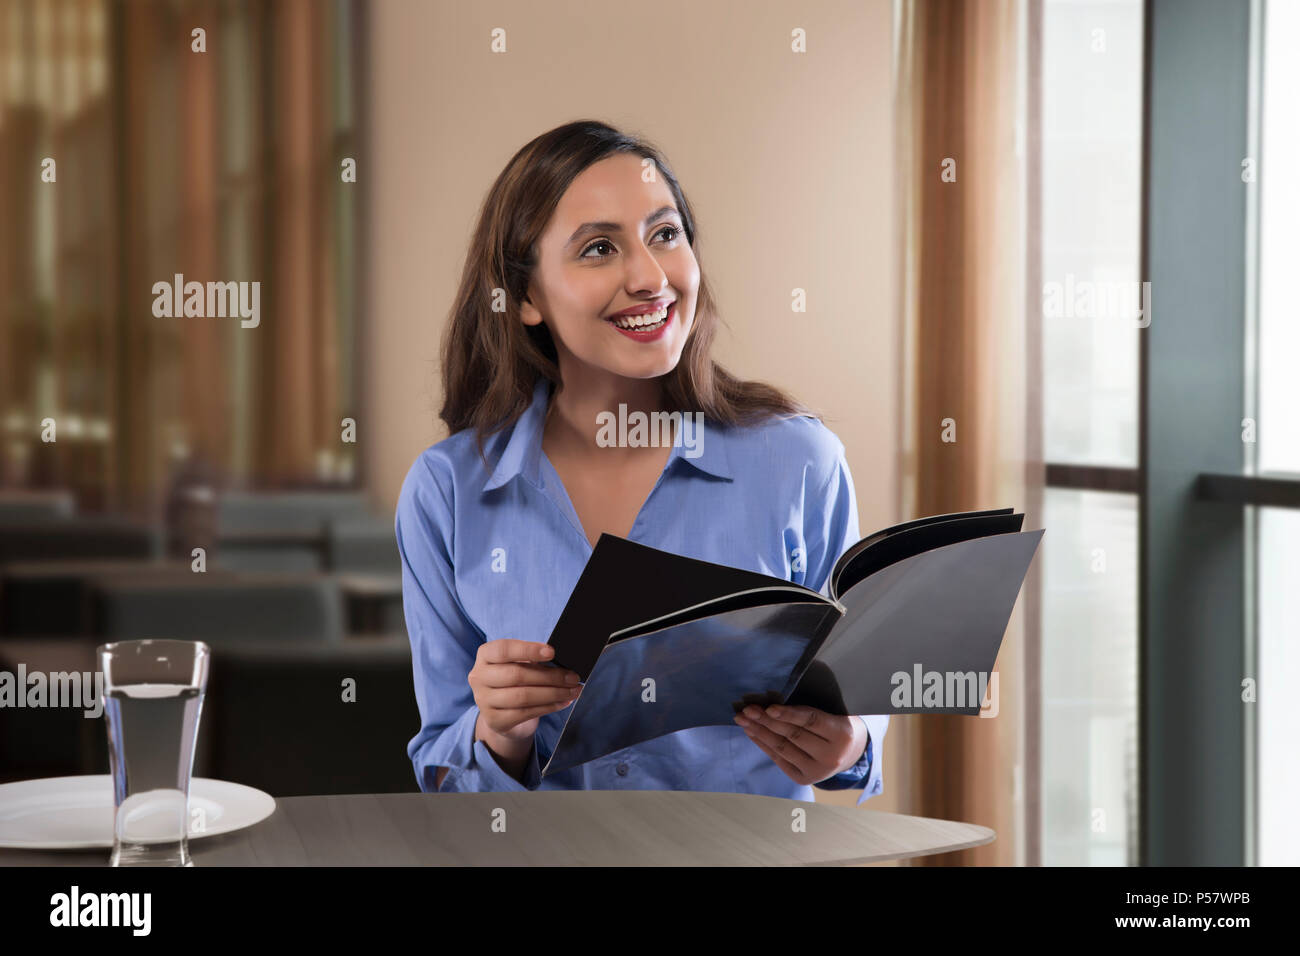 Businesswoman reading magazine on table Banque D'Images